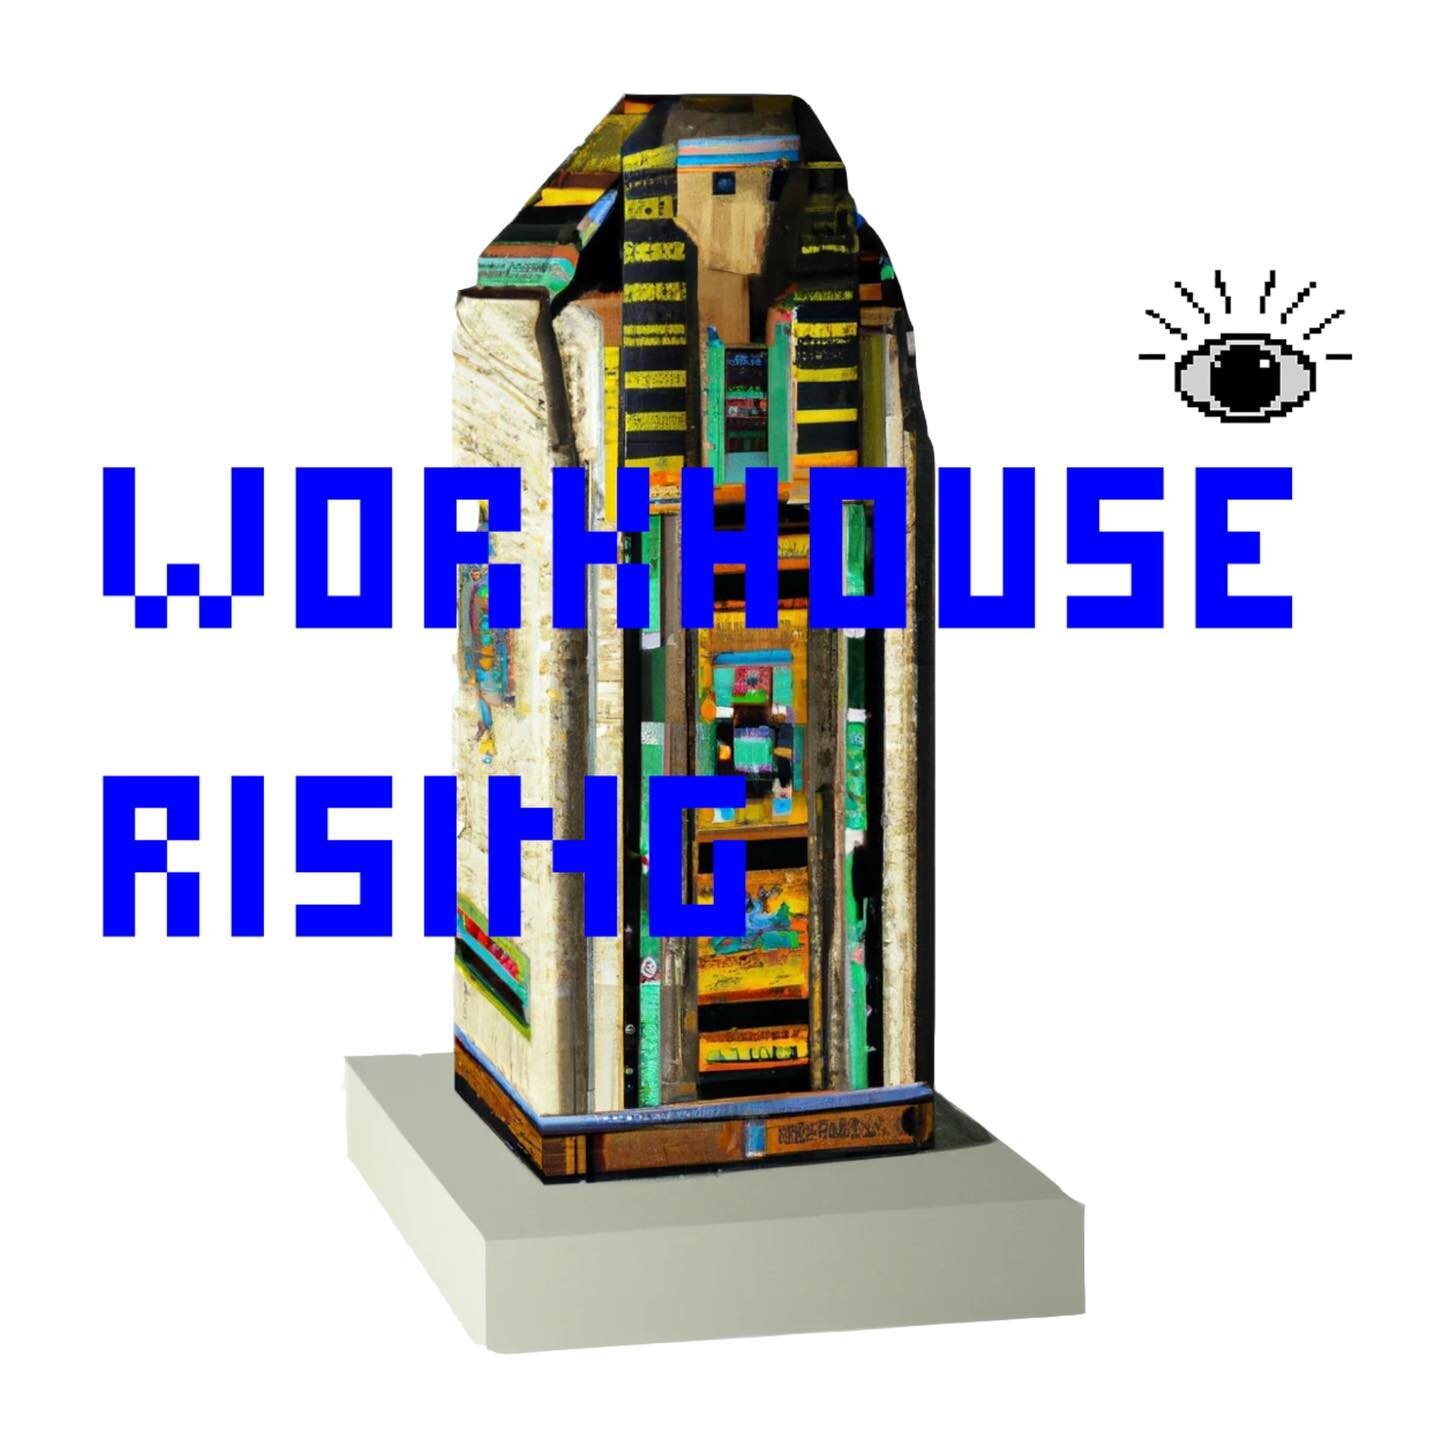 Workhouse Rising #1: ☠️ by 🌄
Digital mag and compilation album featuring an all-star lineup ⭐️:
@ty.positivethinking
@sgcouch
@jane.mc.kenzie
@thedcouch
@abreininger
@ryanhogue_dp
@thehumantackboard
@hughhughes
@pink_bill_dings
@teenagepriest
@paff_